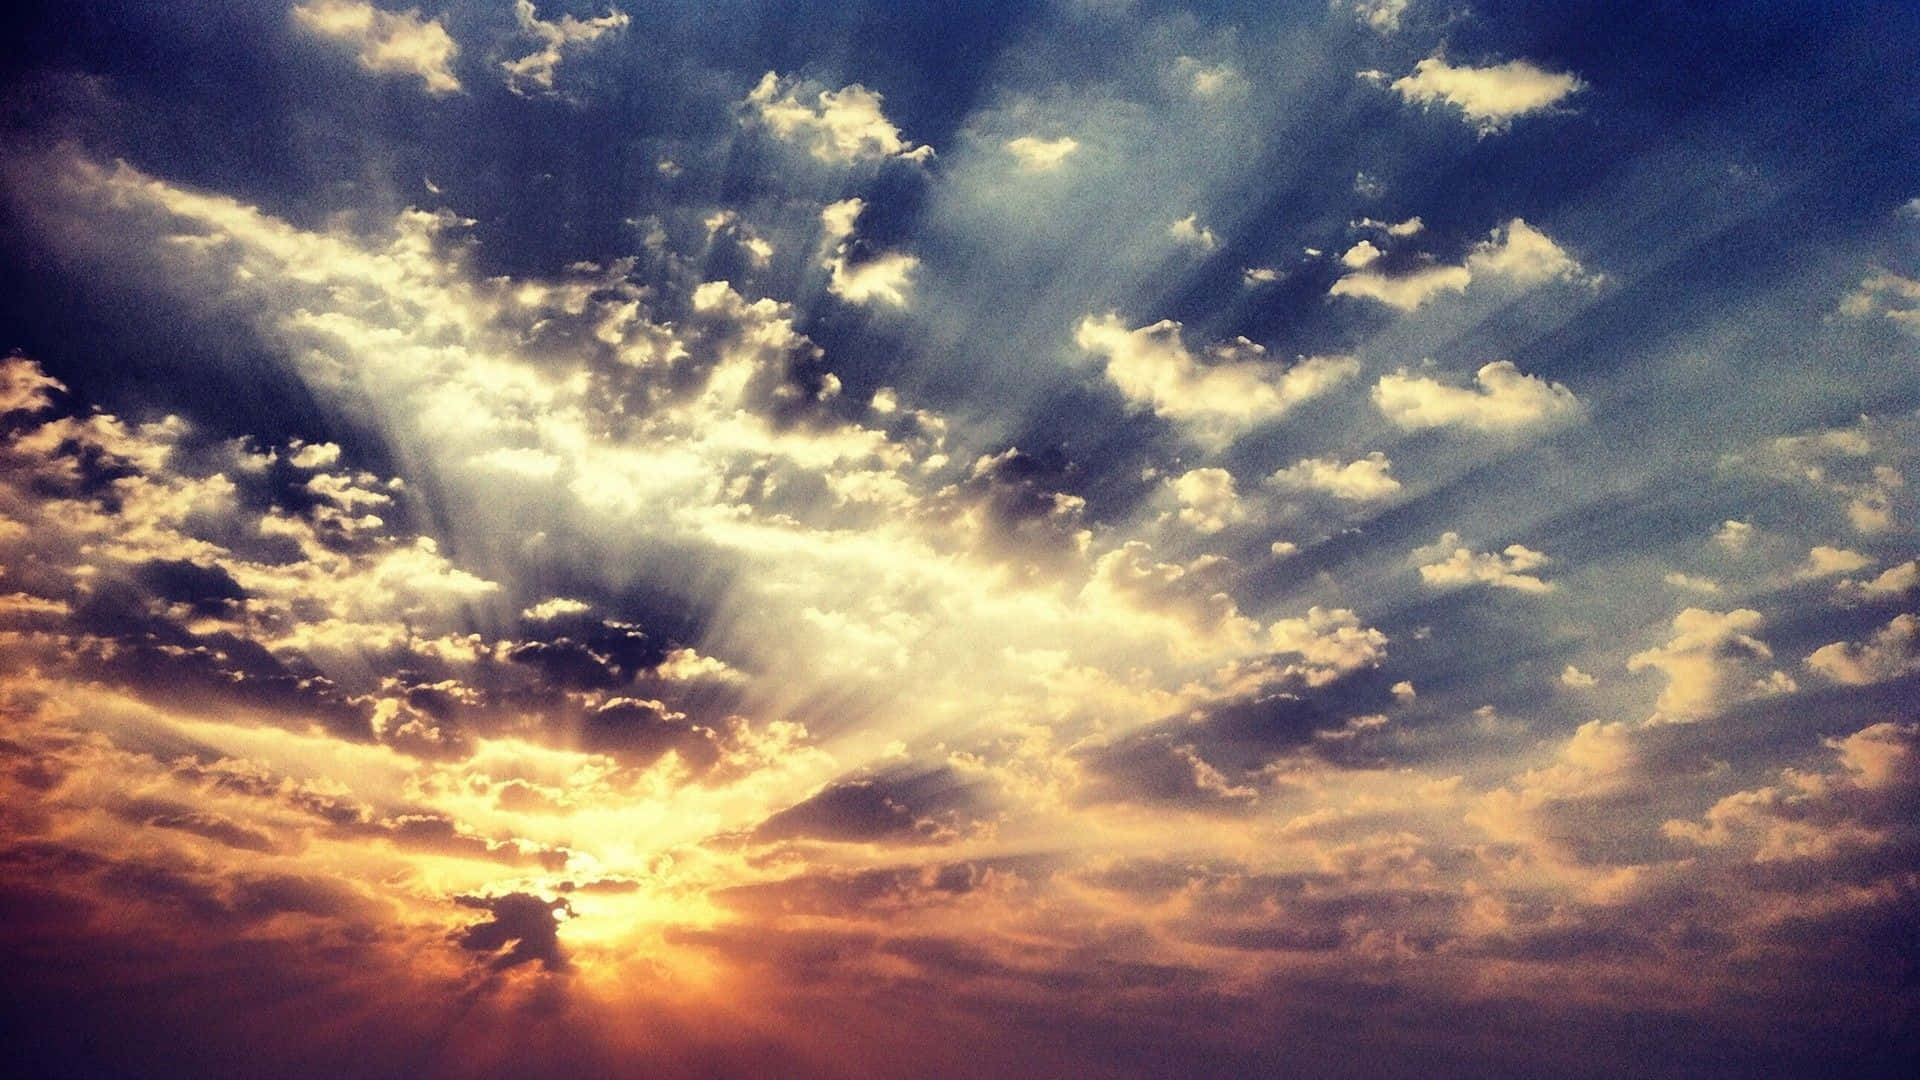 HD Background Of Sunset Sky With Clouds